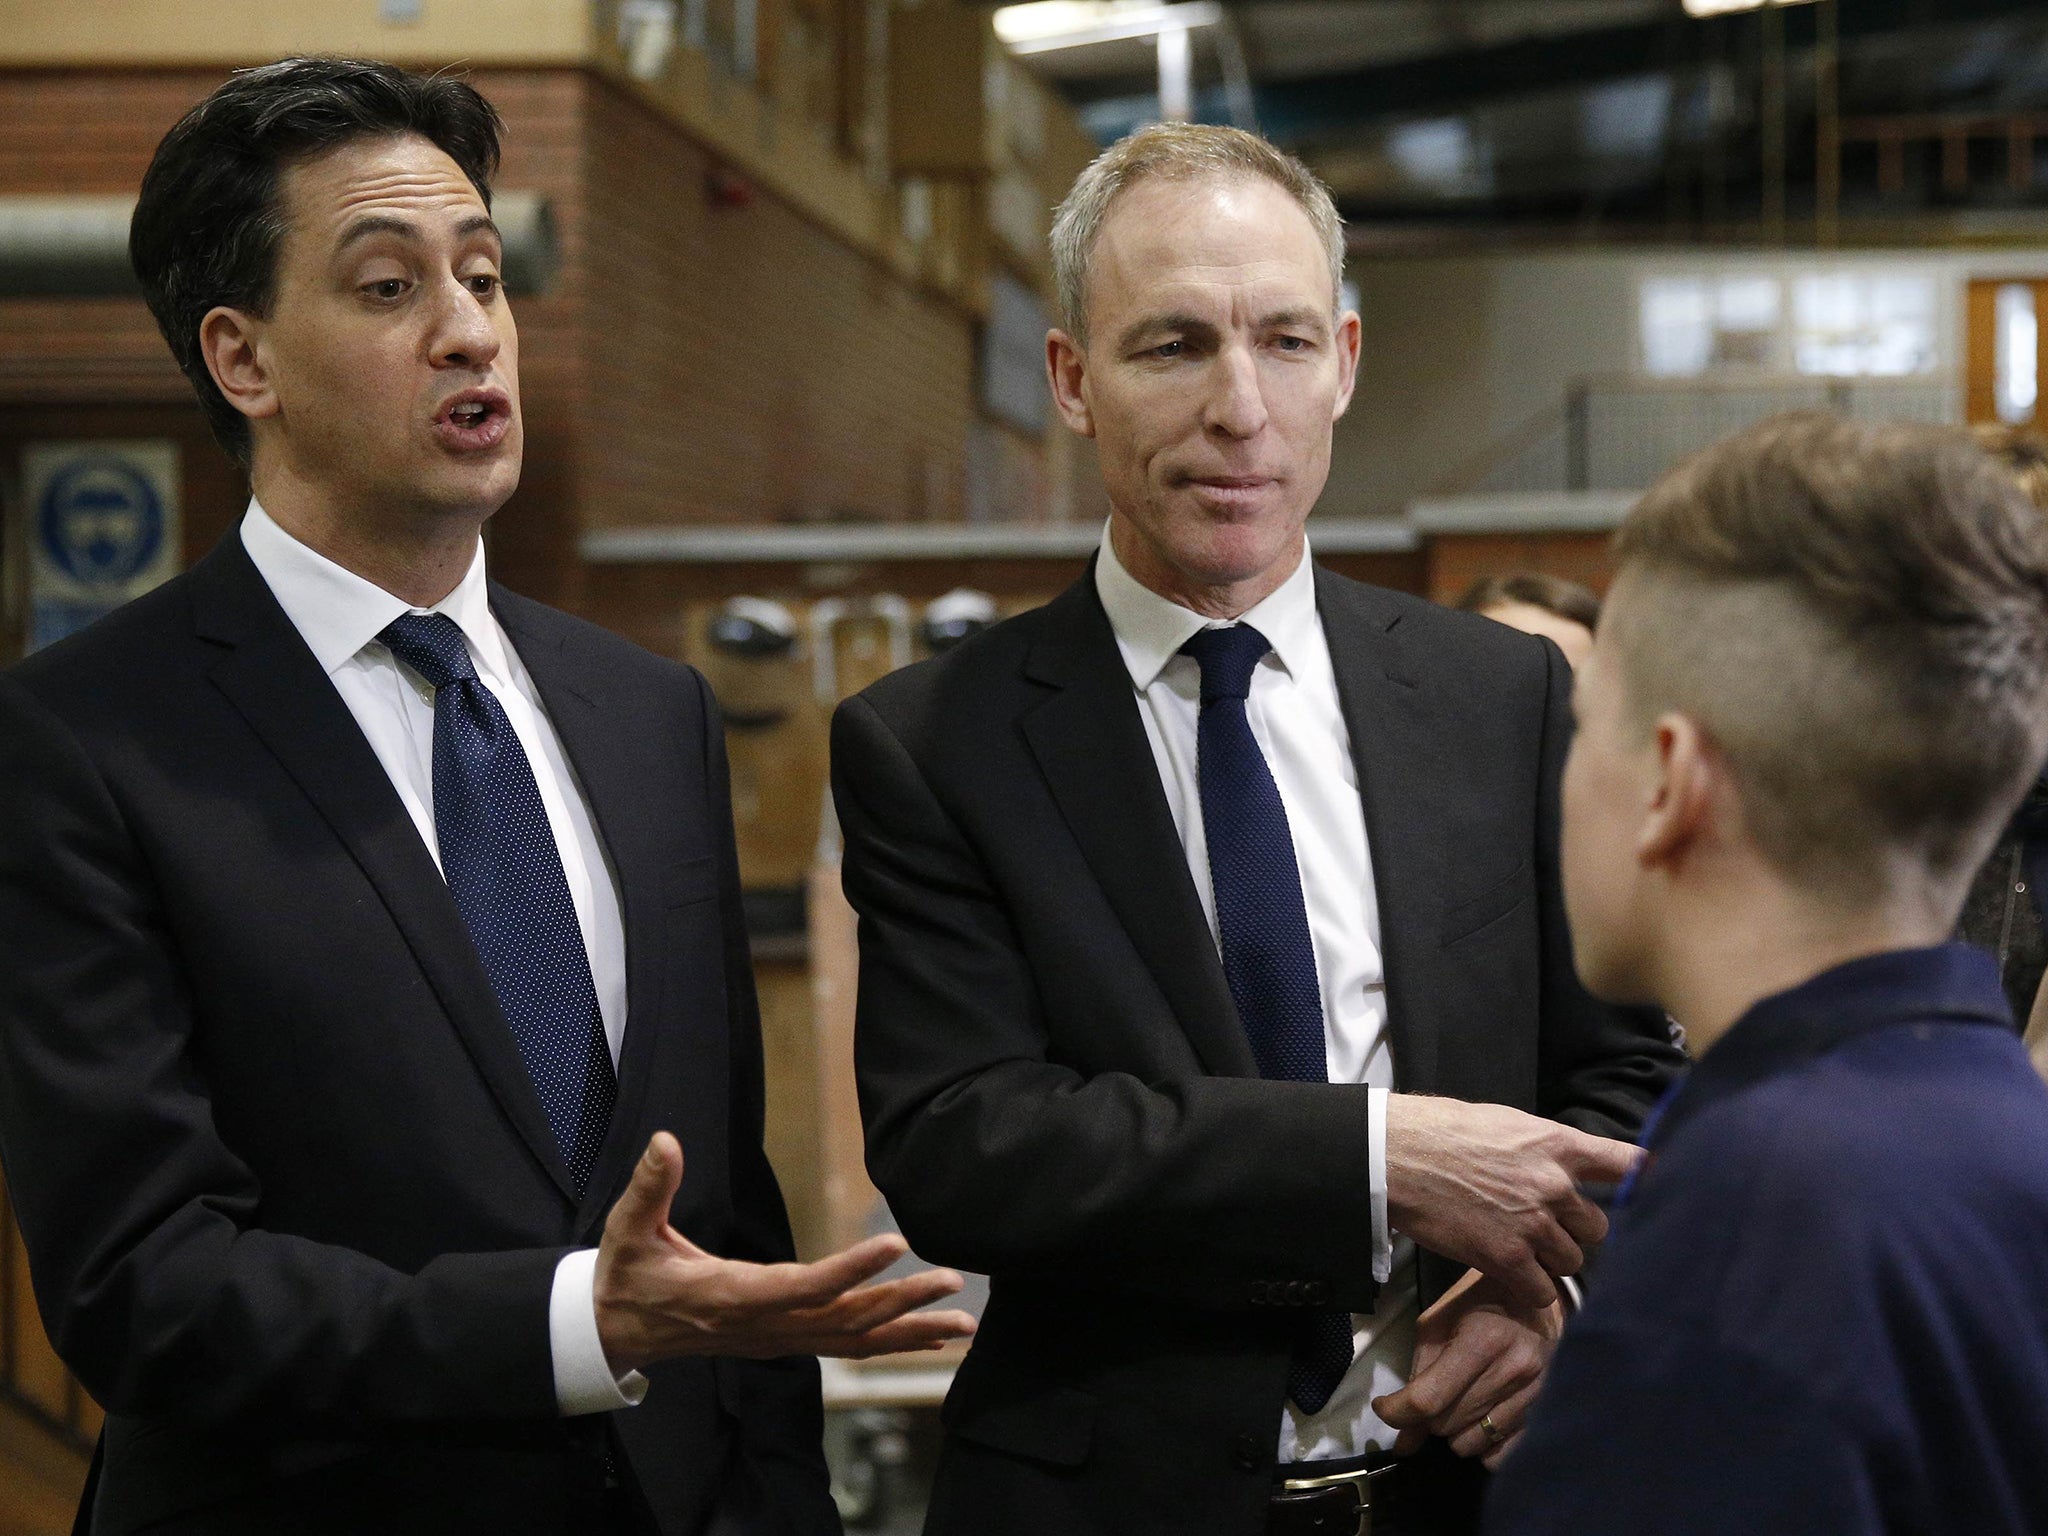 Ed Miliband and Jim Murphy, the Scottish Labour leader, visit Queenslie Training
Centre in Glasgow yesterday